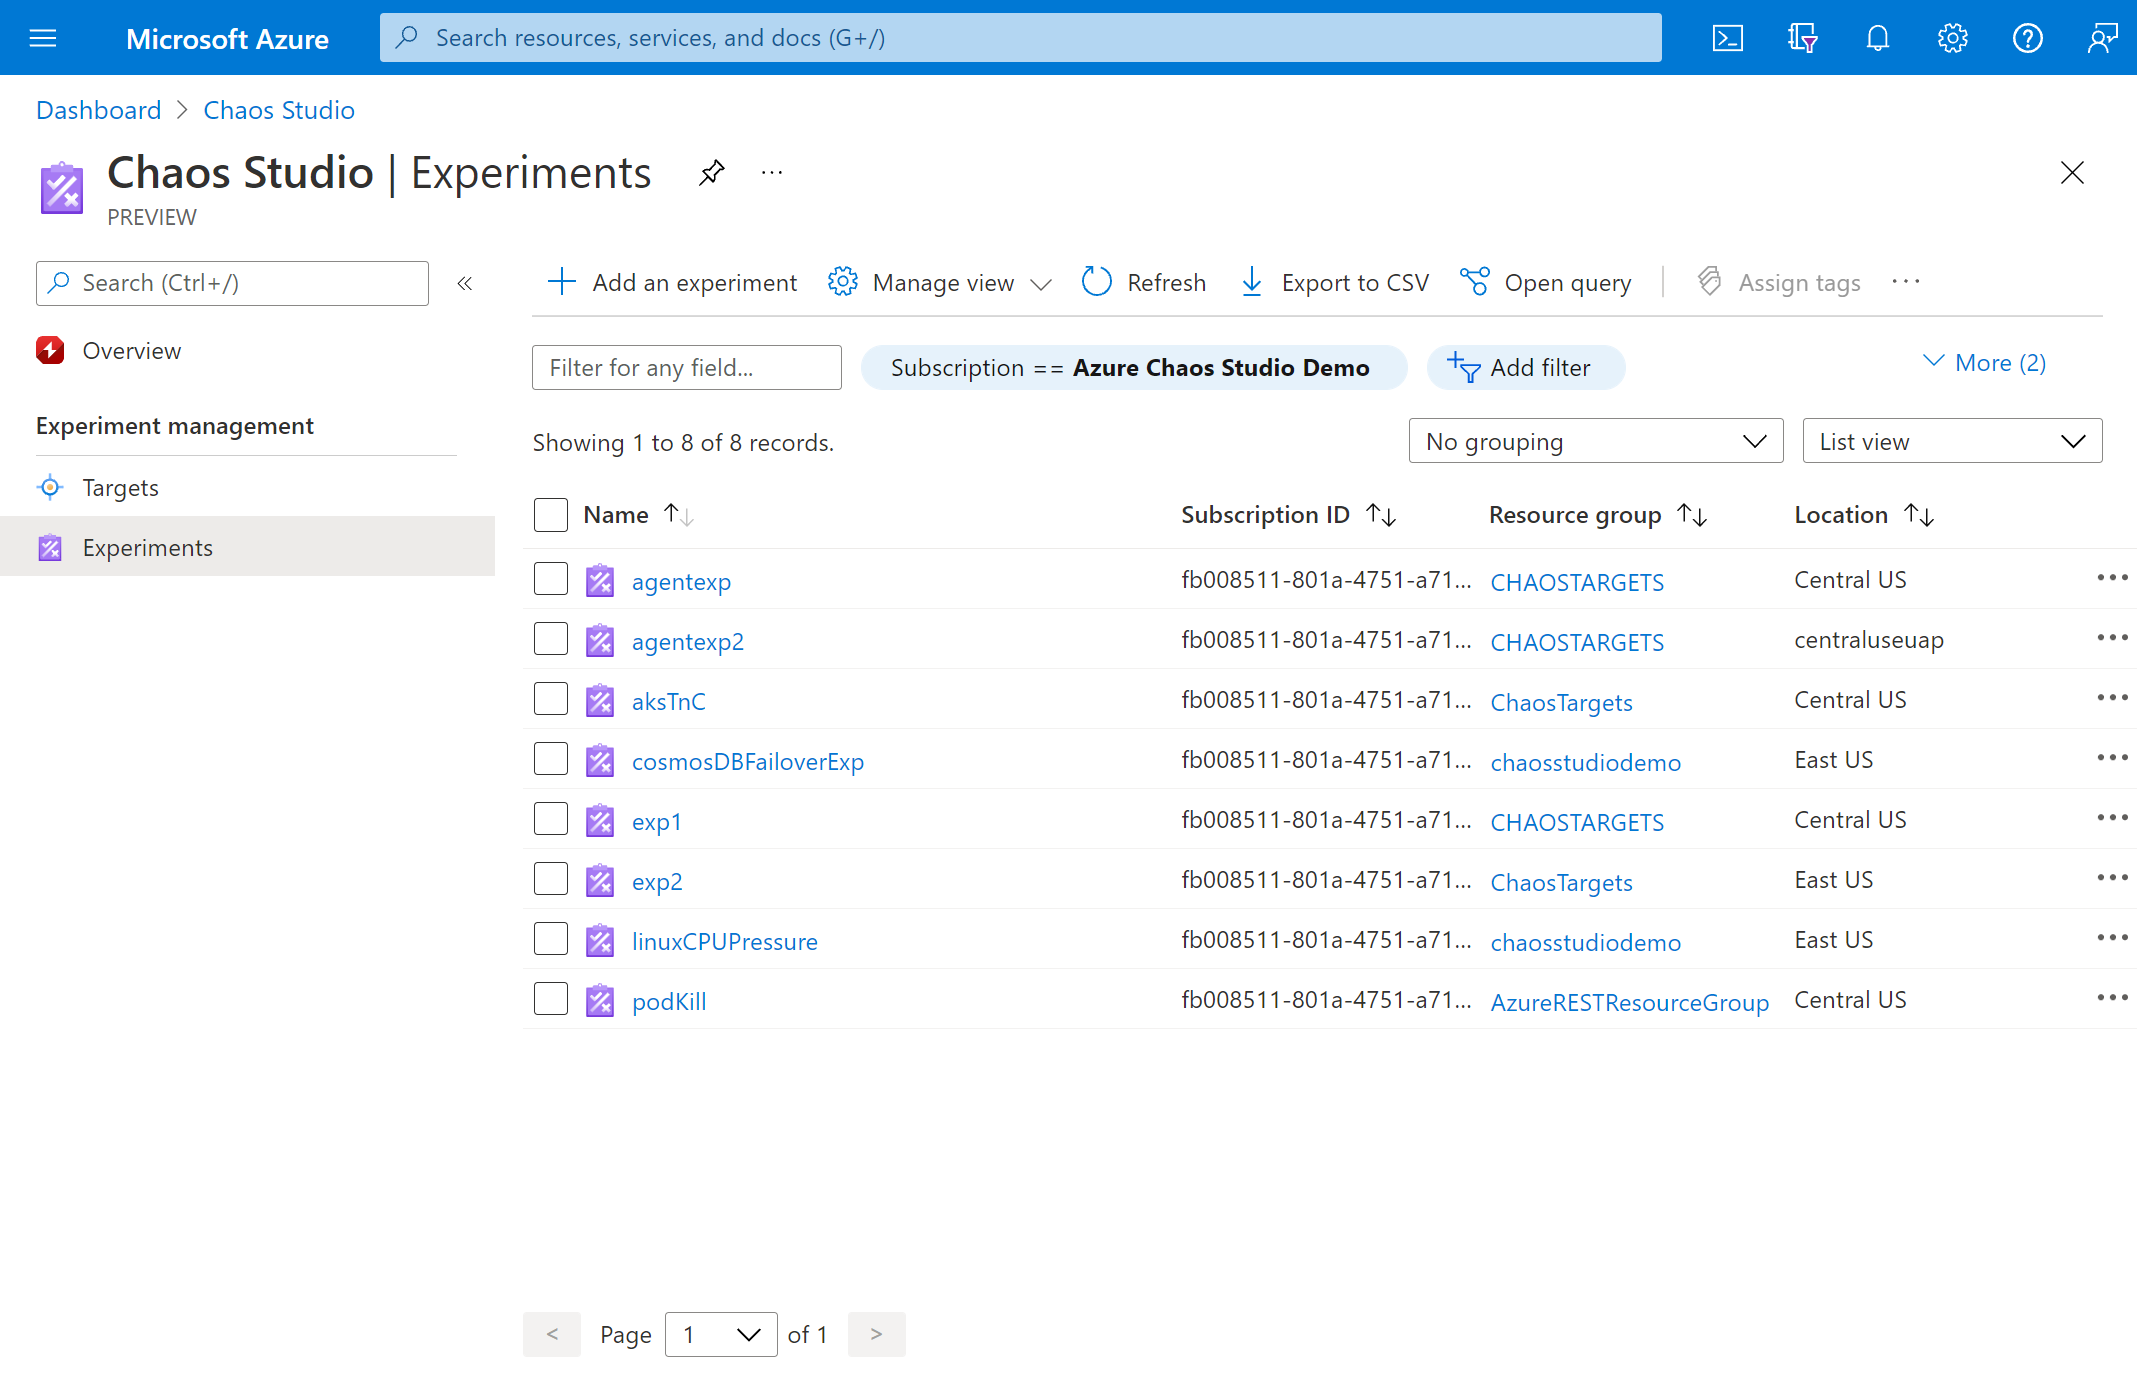 Experiments view in the Azure portal